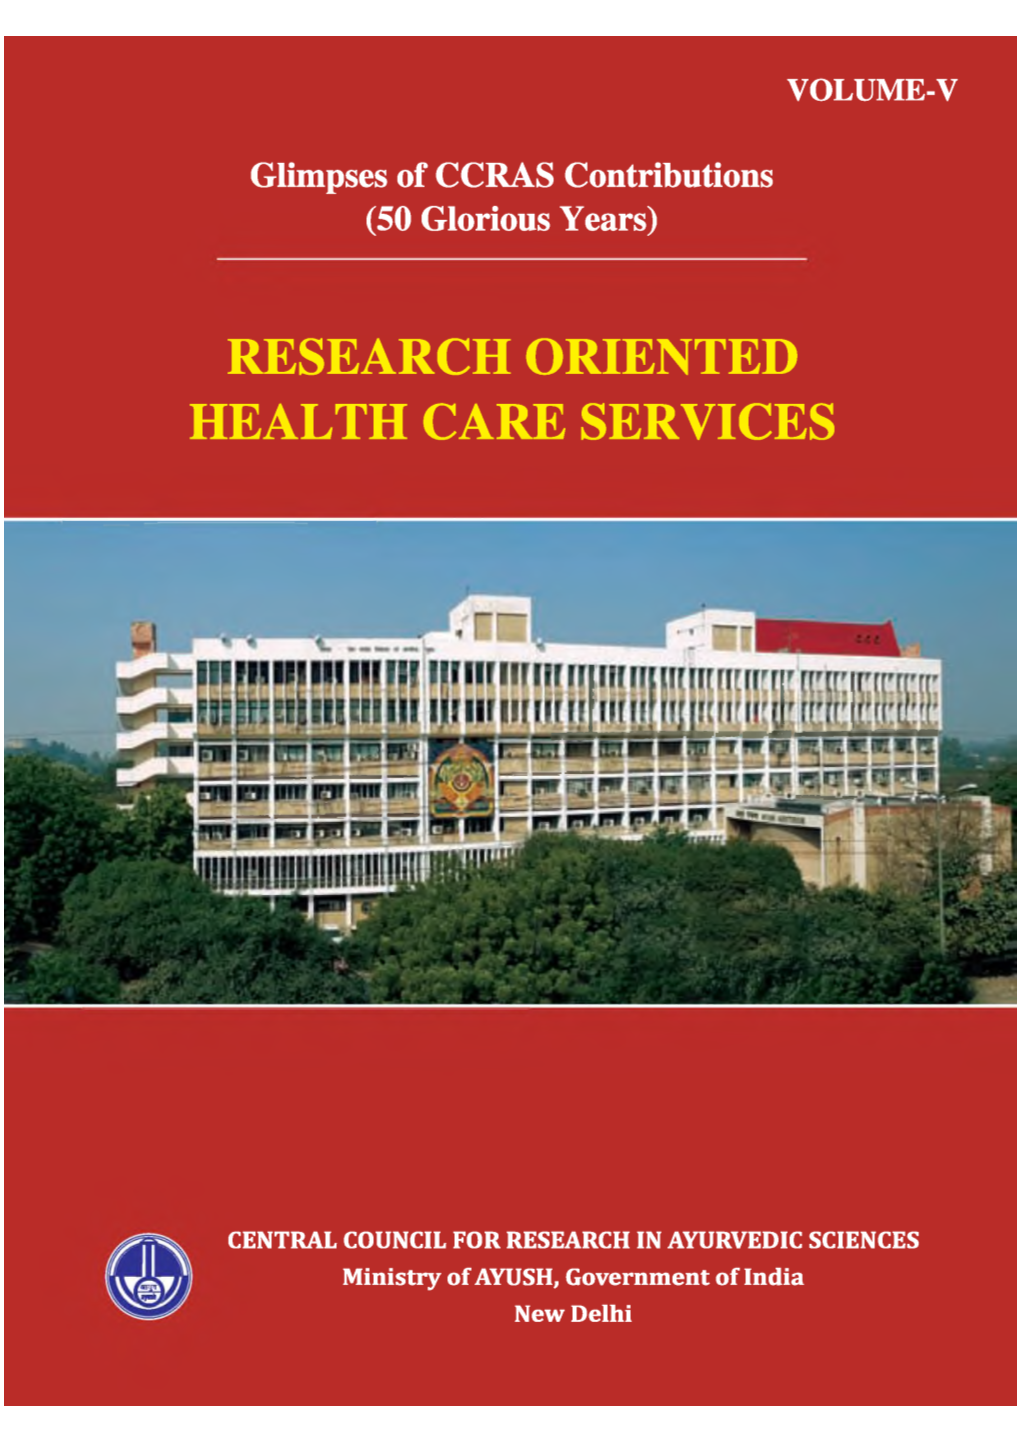 Research Oriented Health Care Services